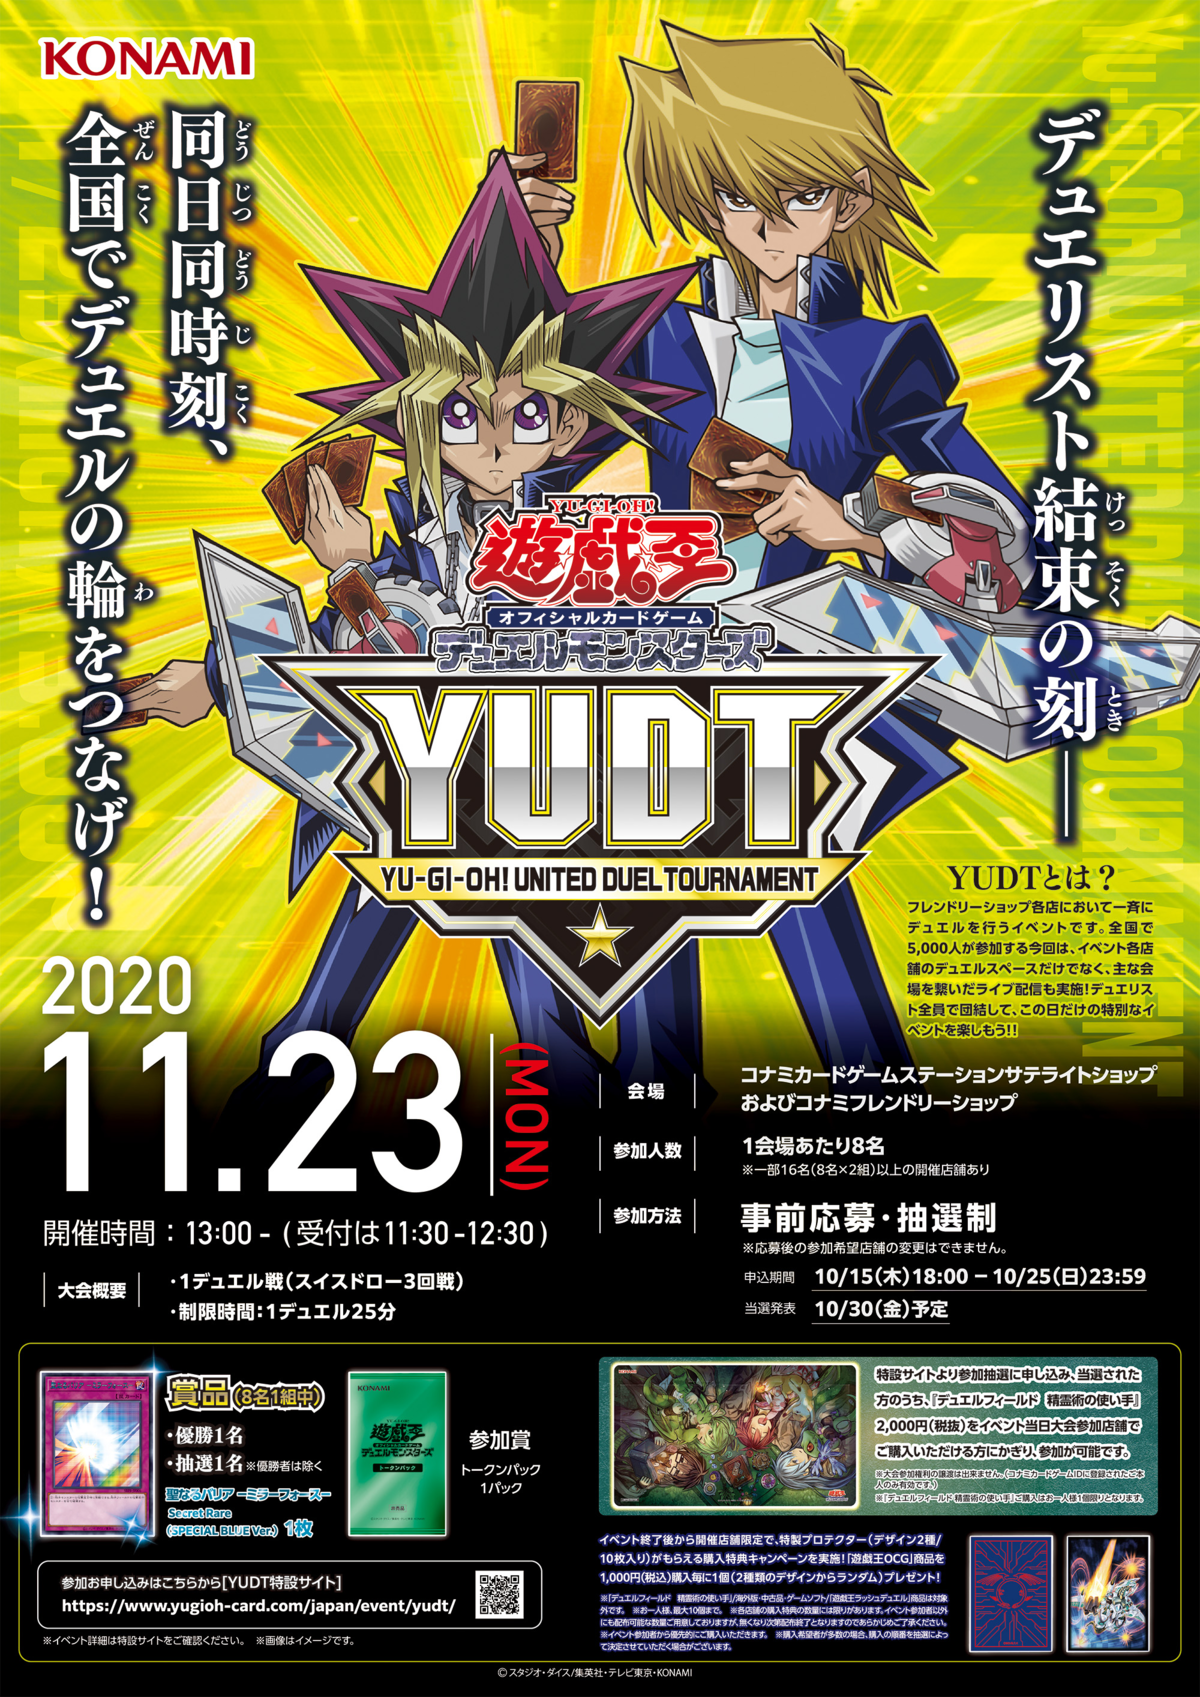 YuGiOh News on X: ❰𝗬𝗨𝗚𝗜-𝗙𝗔𝗖𝗧!❱ The inspiration for the